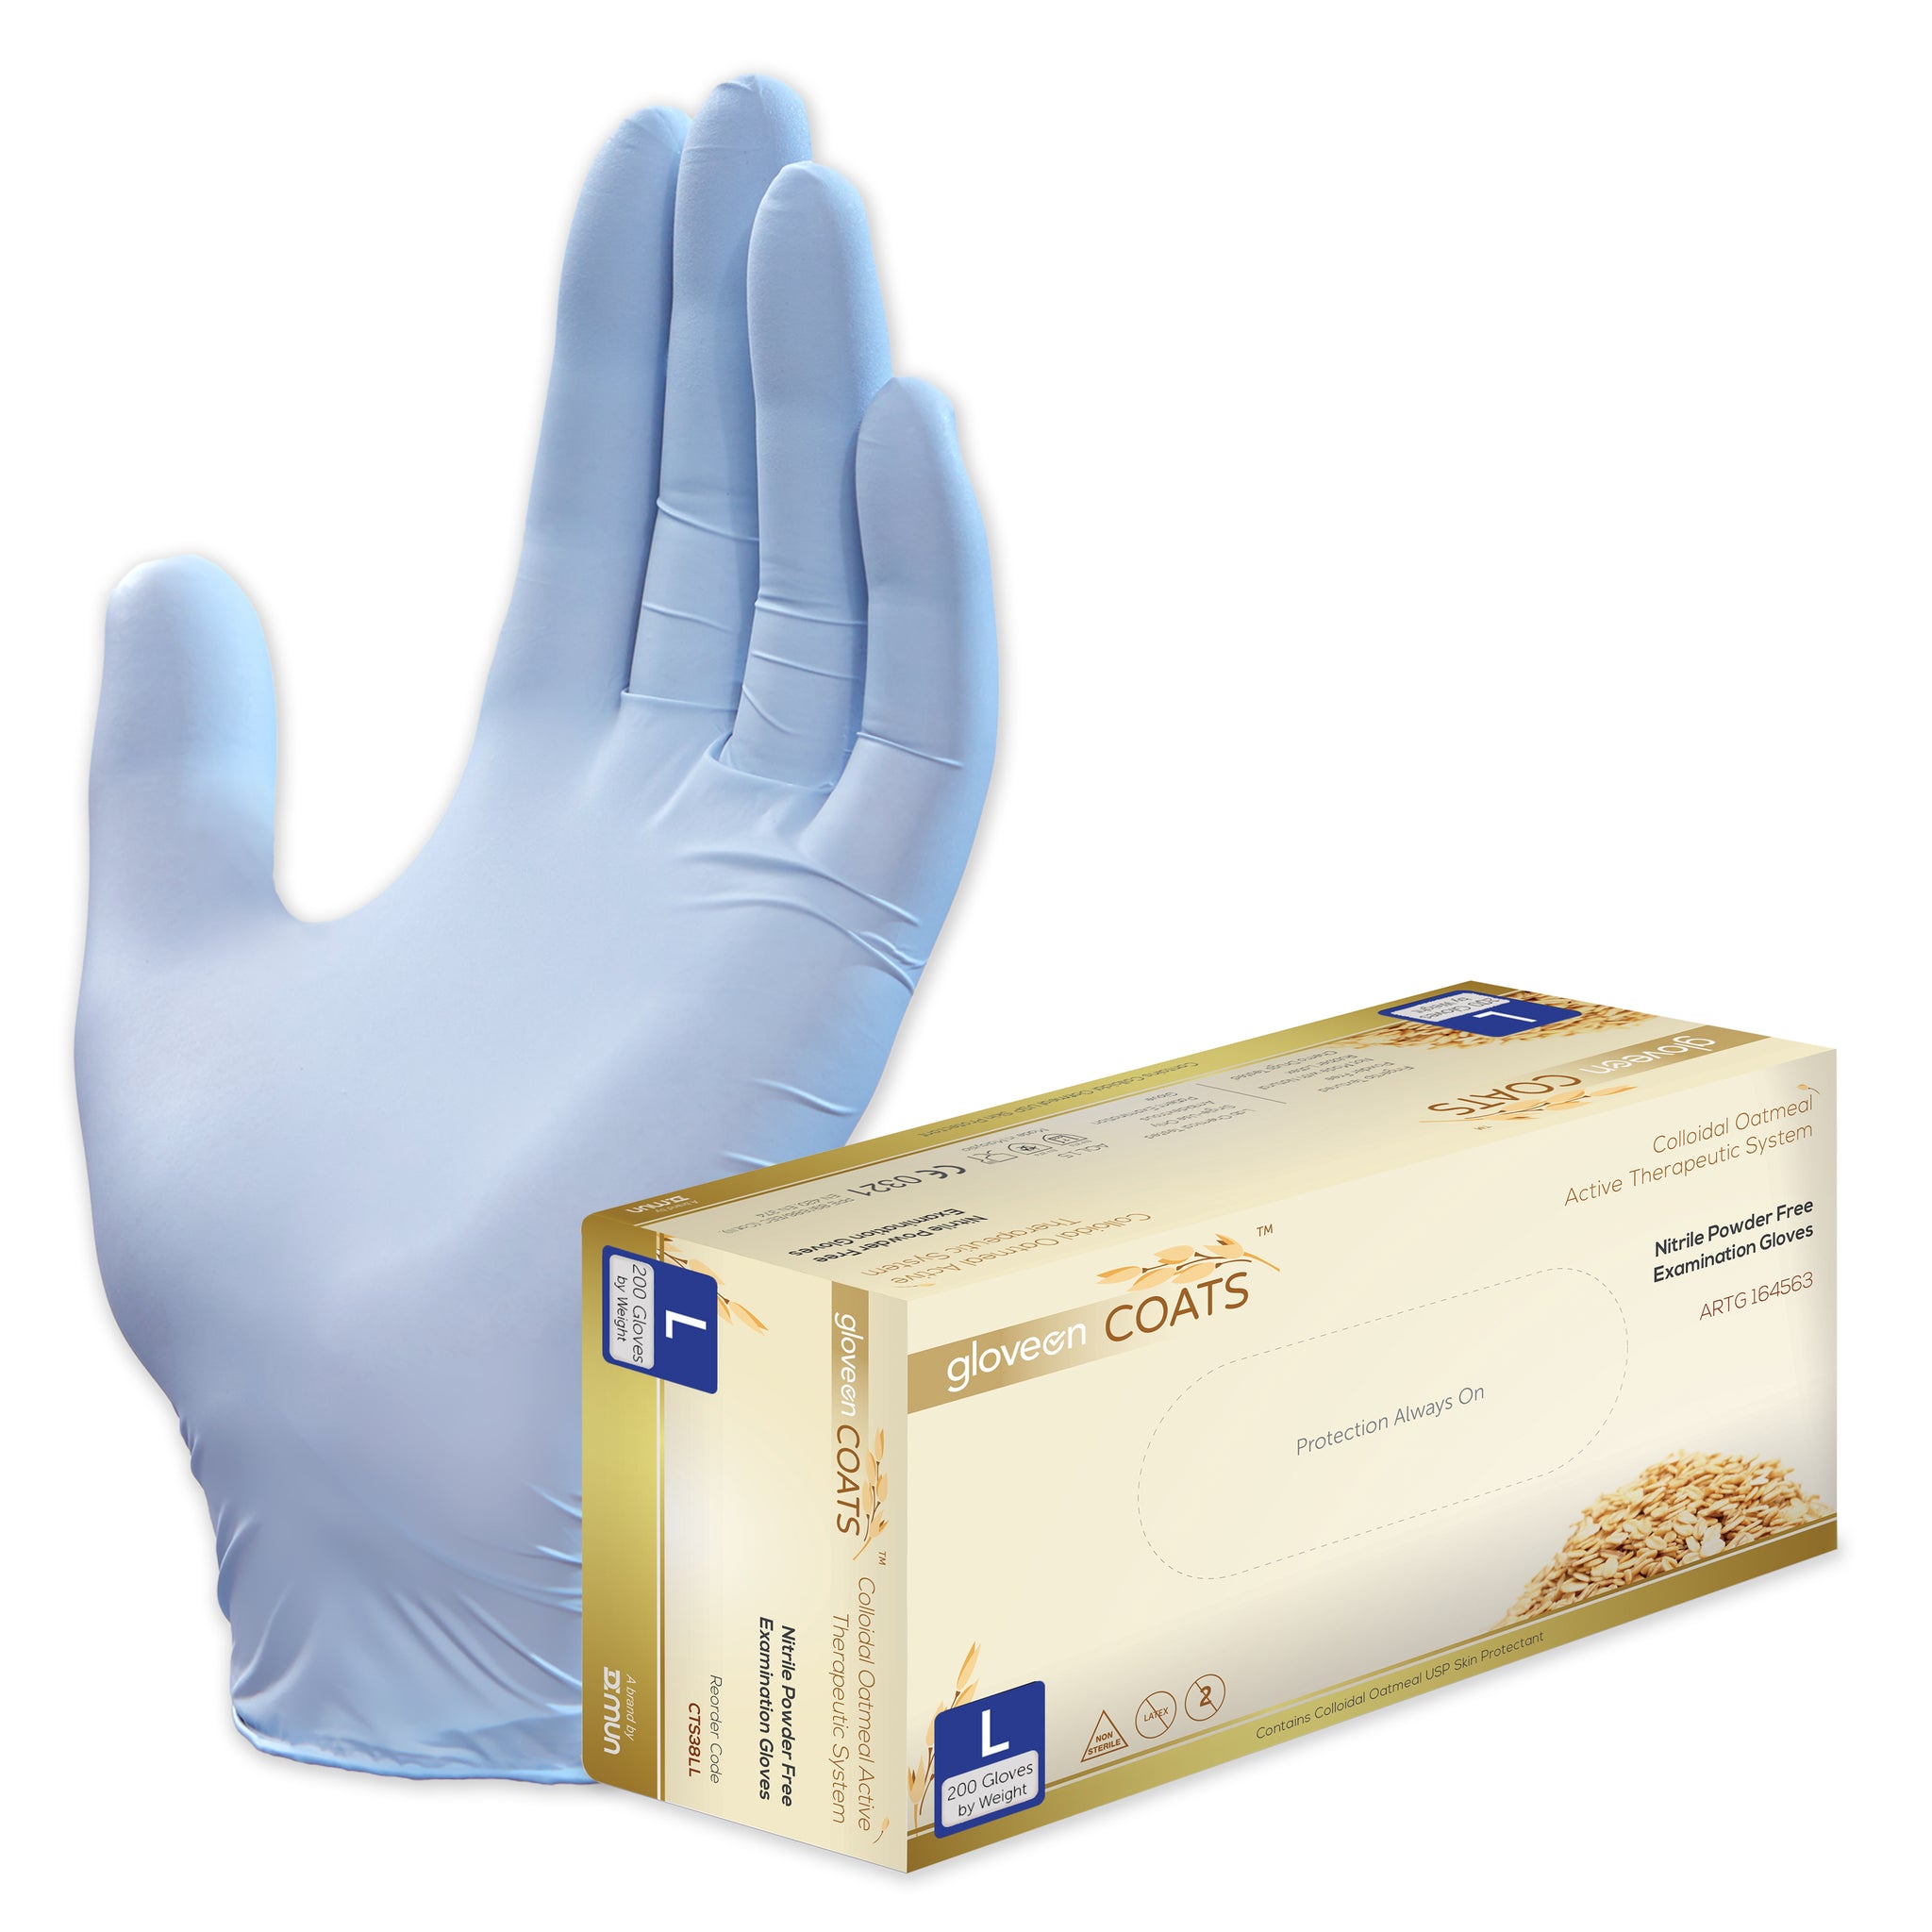 Nitrile Exam Gloves with Colloidal Oatmeal System, Powder Free, Non-Sterile, Fingertip Textured, Colloidal Oats Coated, Standard Cuff, Dawn Blue - Box of 200, L